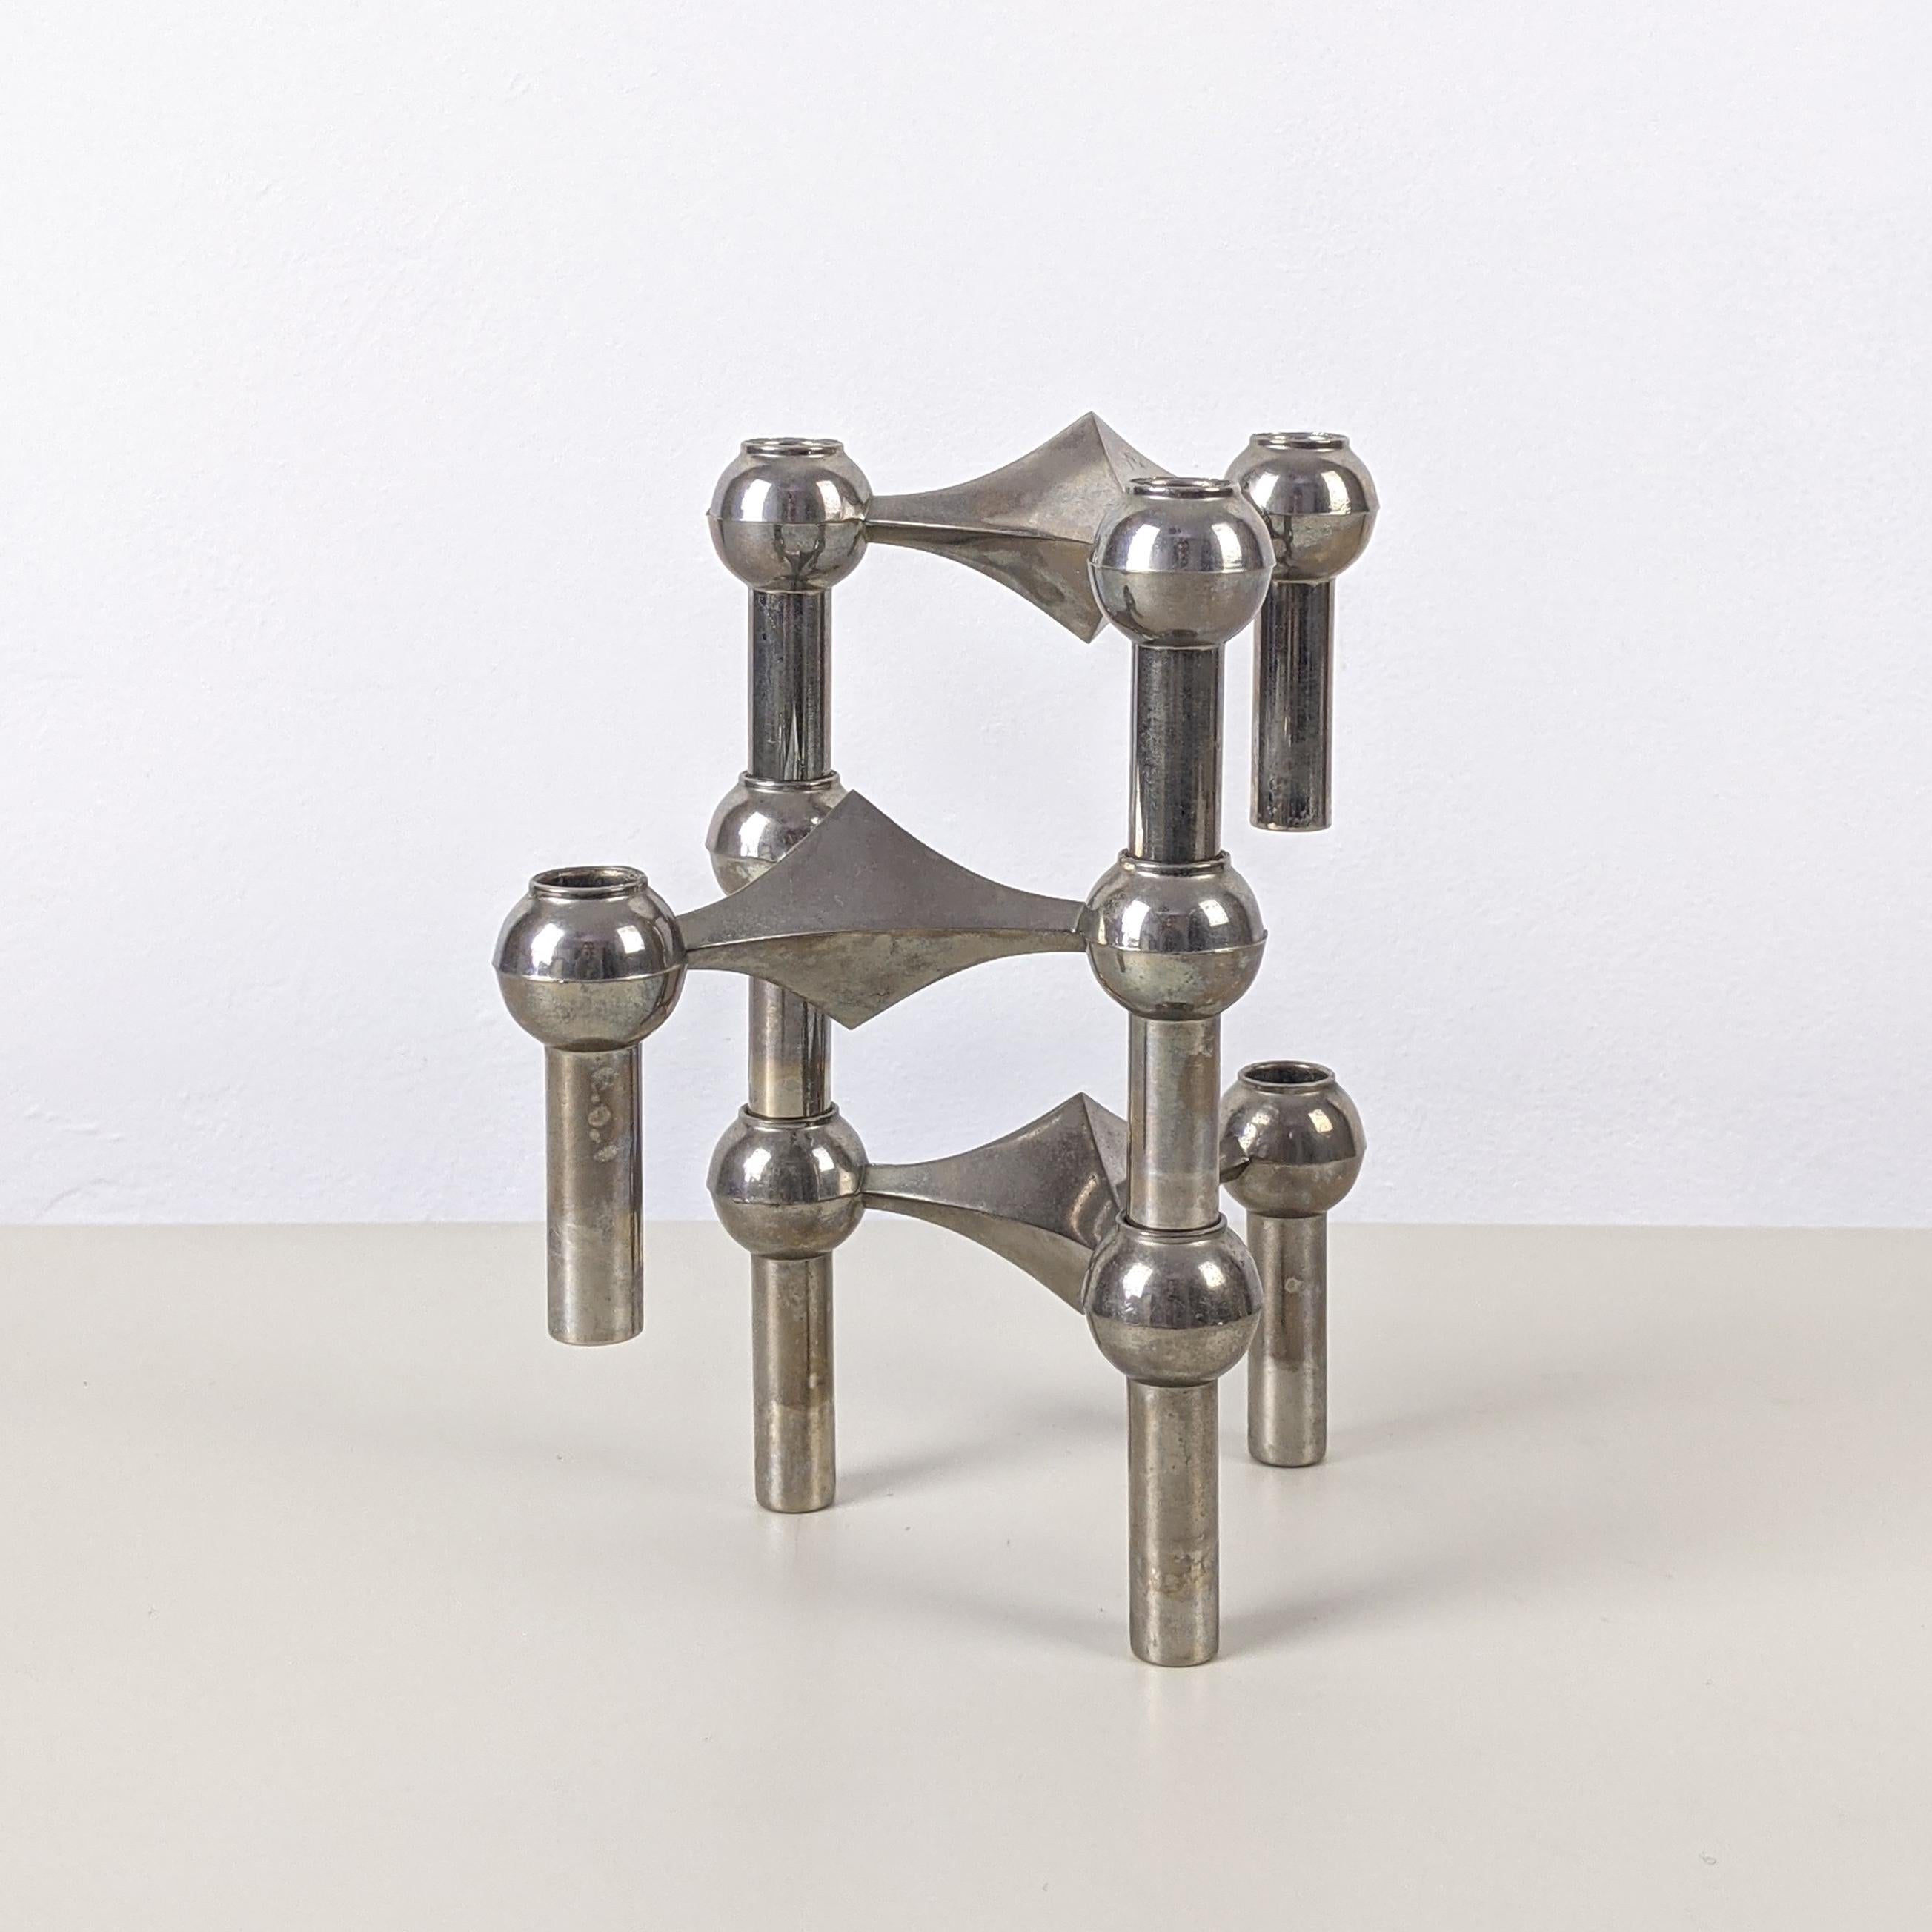 Caesar Stoffi for Fritz Nagel c. 1970
3 modular stacking candleholders

Polished metal
Good condition
One piece with original 'Nagel' label.
Please note, we prefer these candle holders un-polished with their original patina. They could,